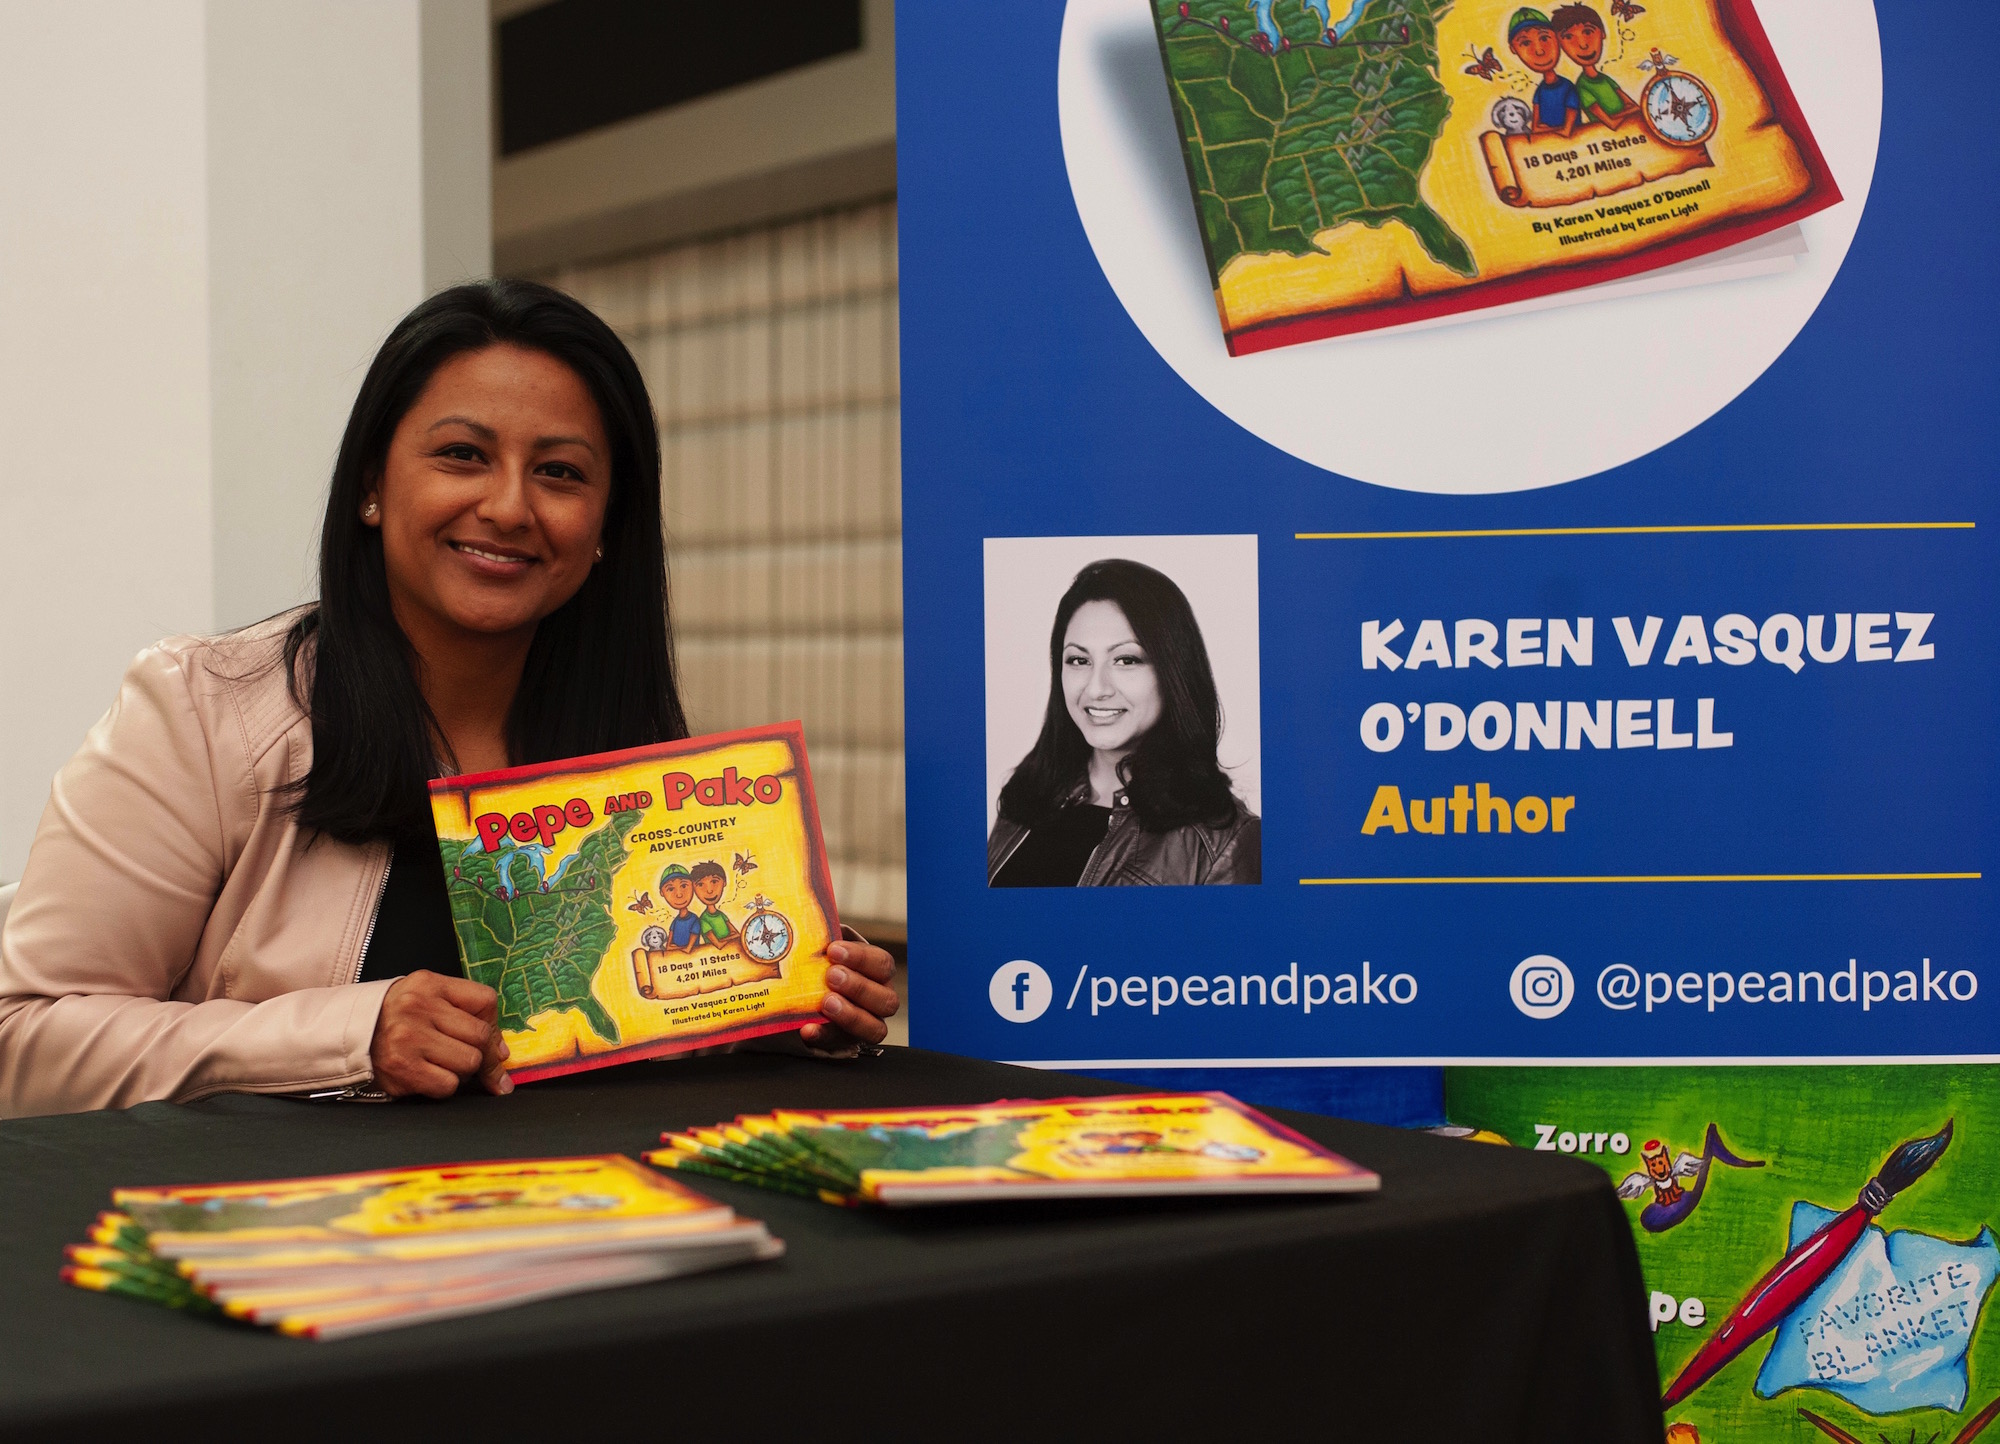 Children's author Karen Vasquez O'Donnell appears at a recent book signing event promoting her new work "Pepe and Pako: Cross-Country Adventure."